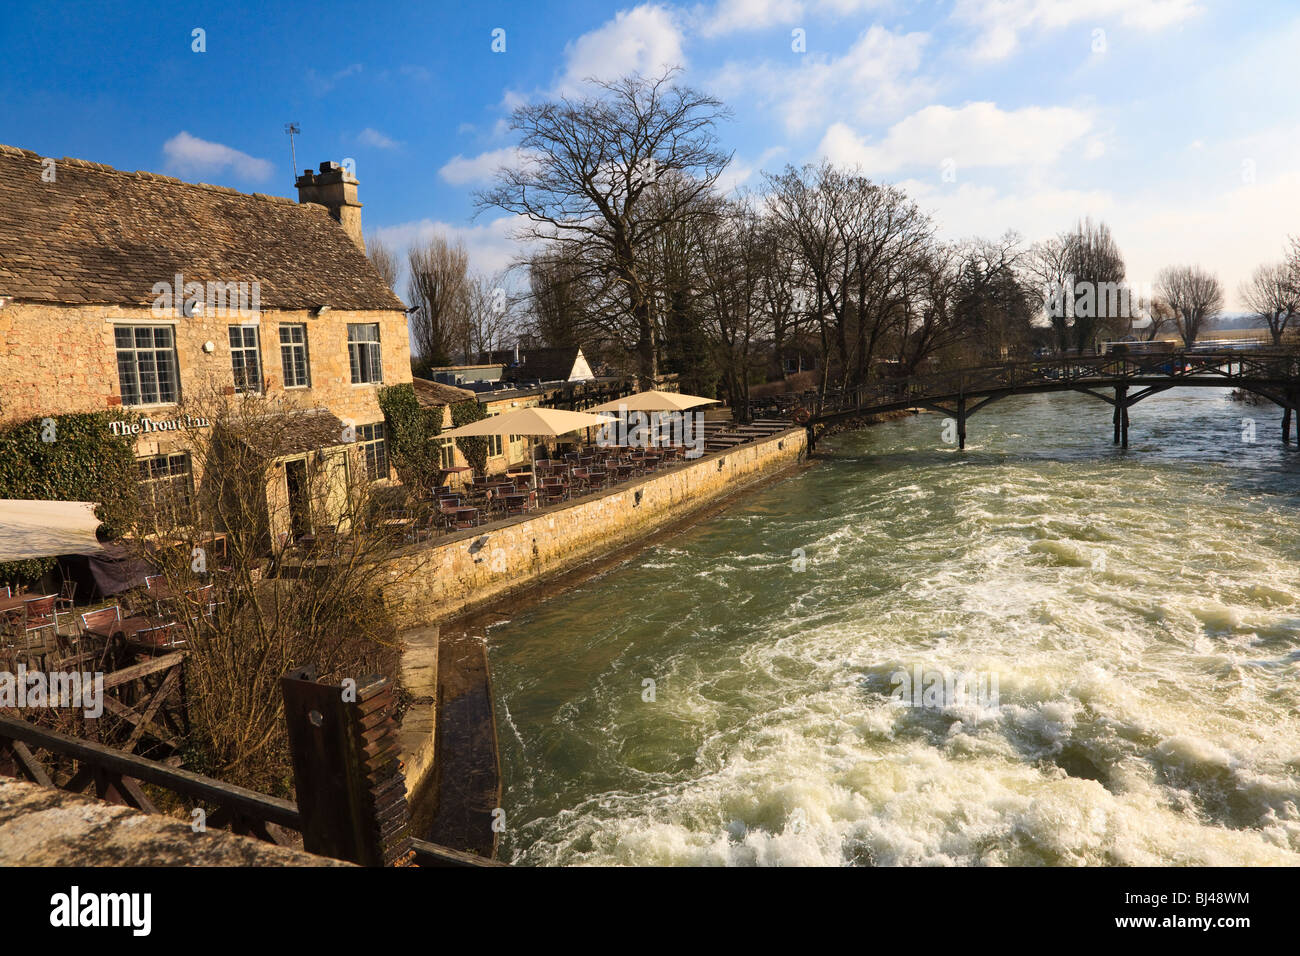 The Trout Inn on the River Thames at Wolvercote, with Turbulent water flowing through the weir, Oxford, Oxfordshire Stock Photo